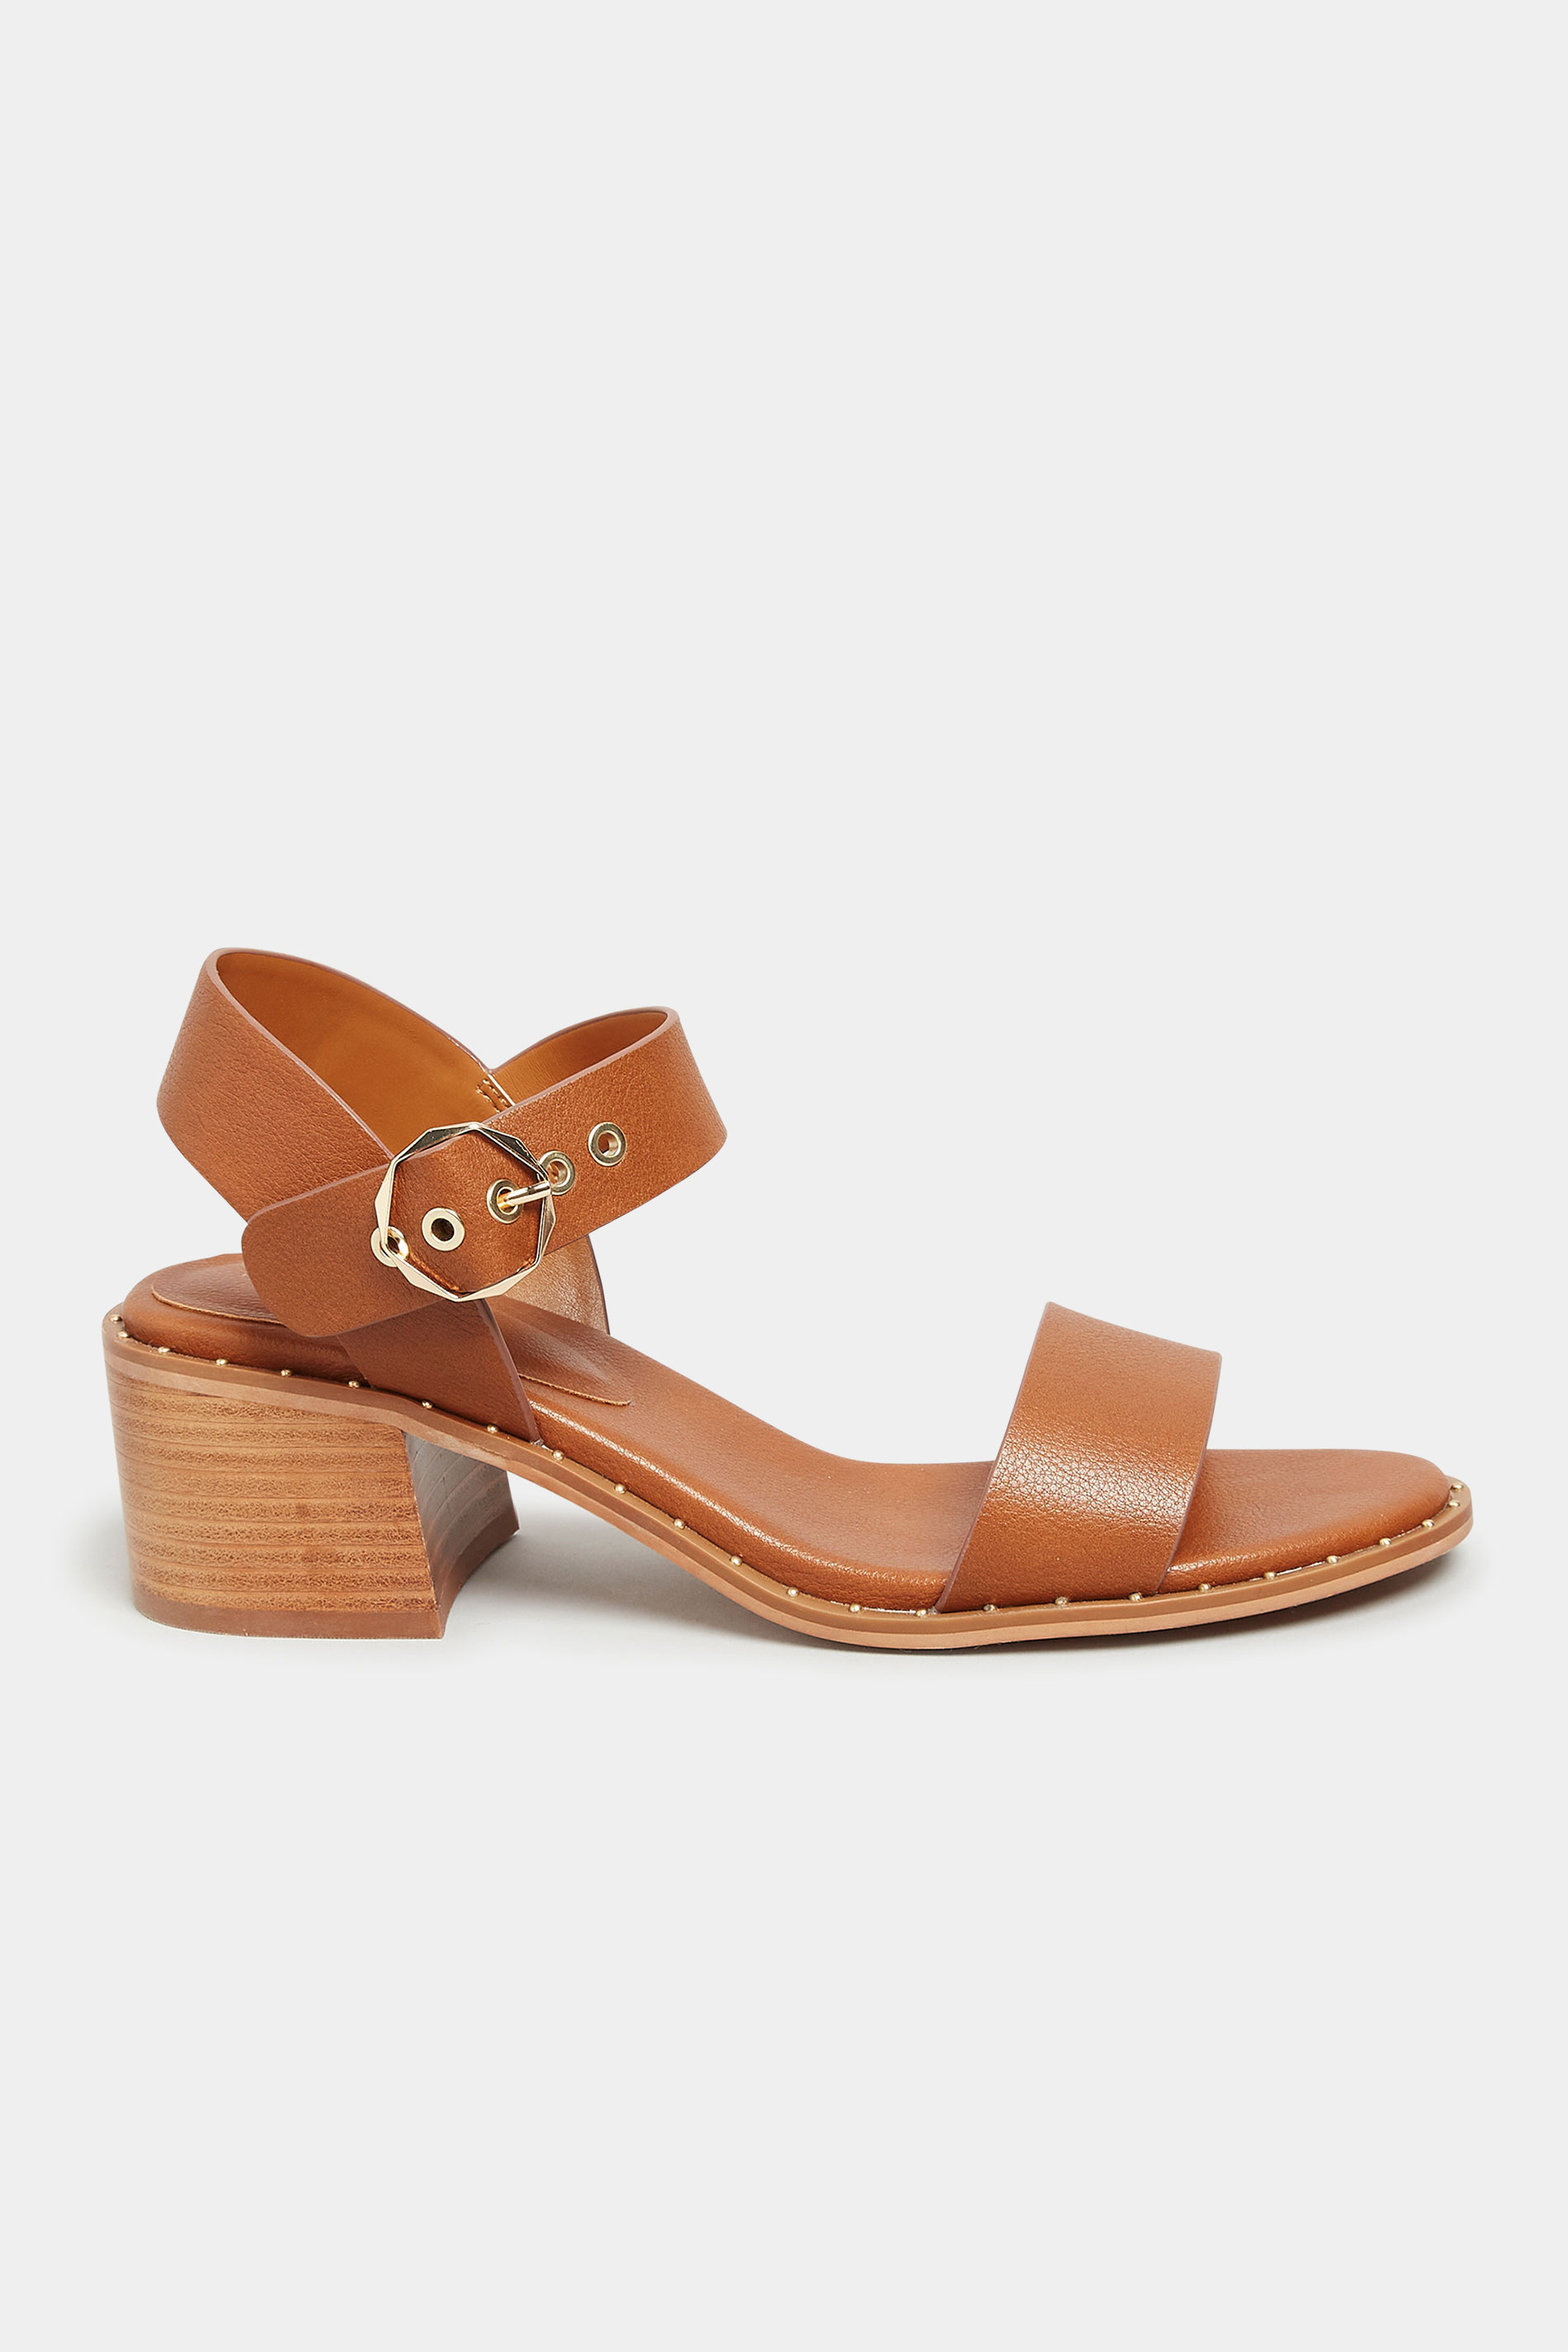 Womens Shoes Heels | LTS Tan Brown Studded Block Heel Sandals In Standard D Fit - VY52452